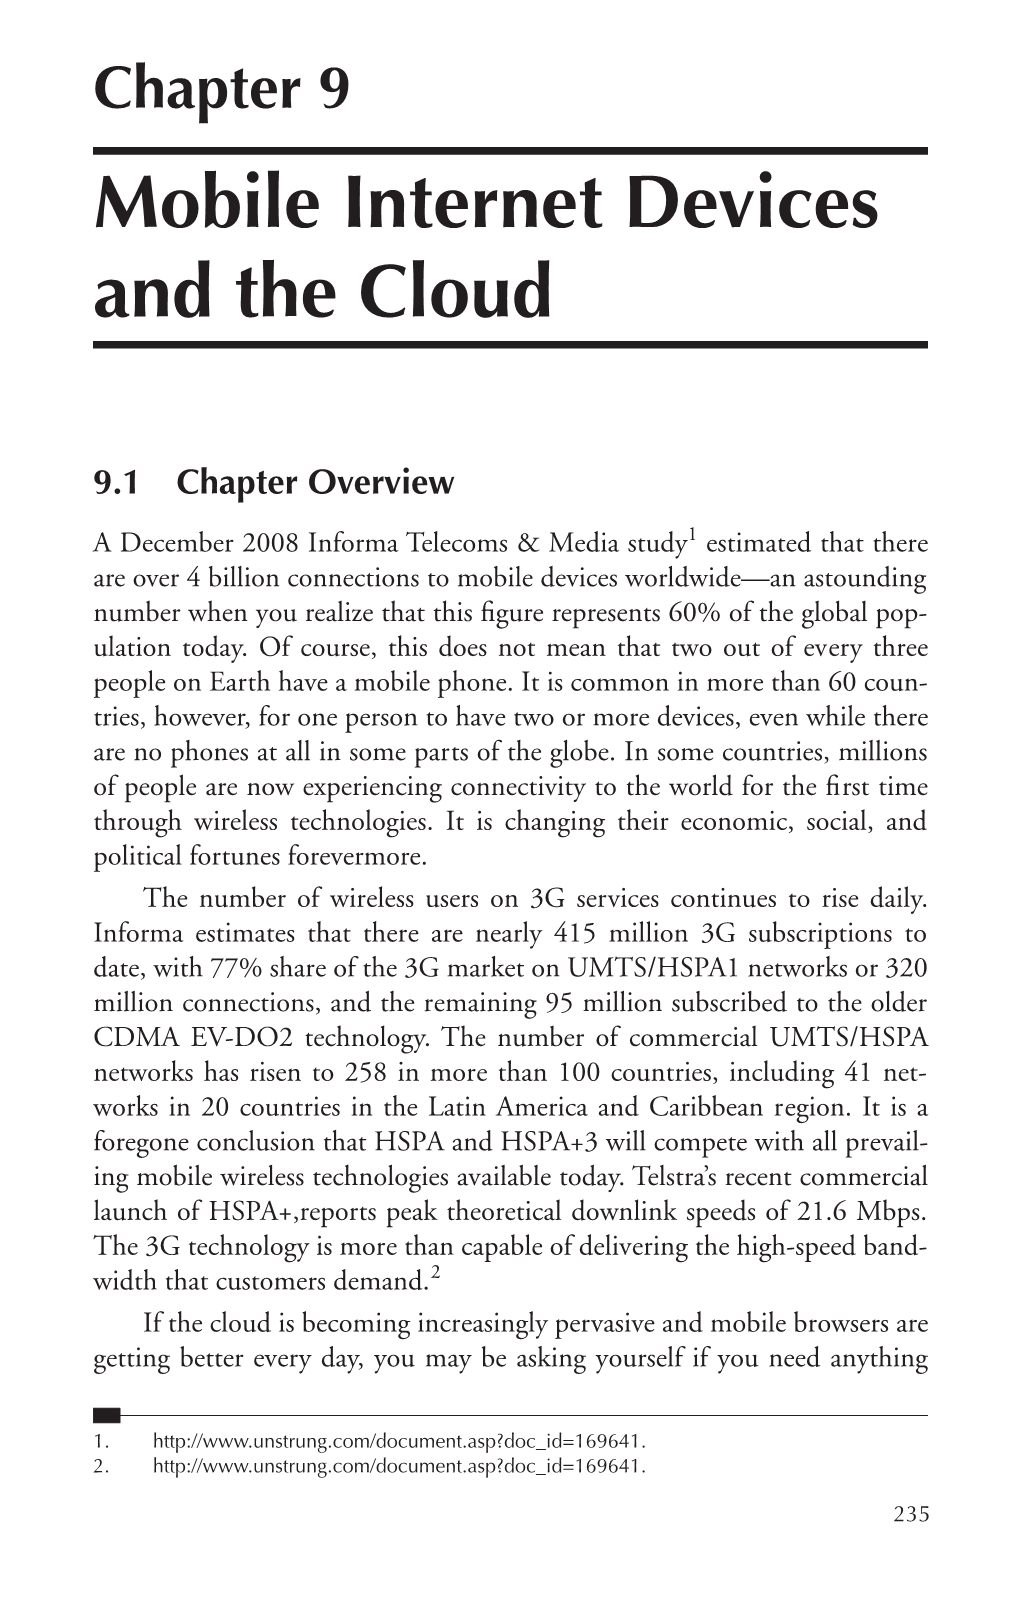 Chapter 9 Mobile Internet Devices and the Cloud